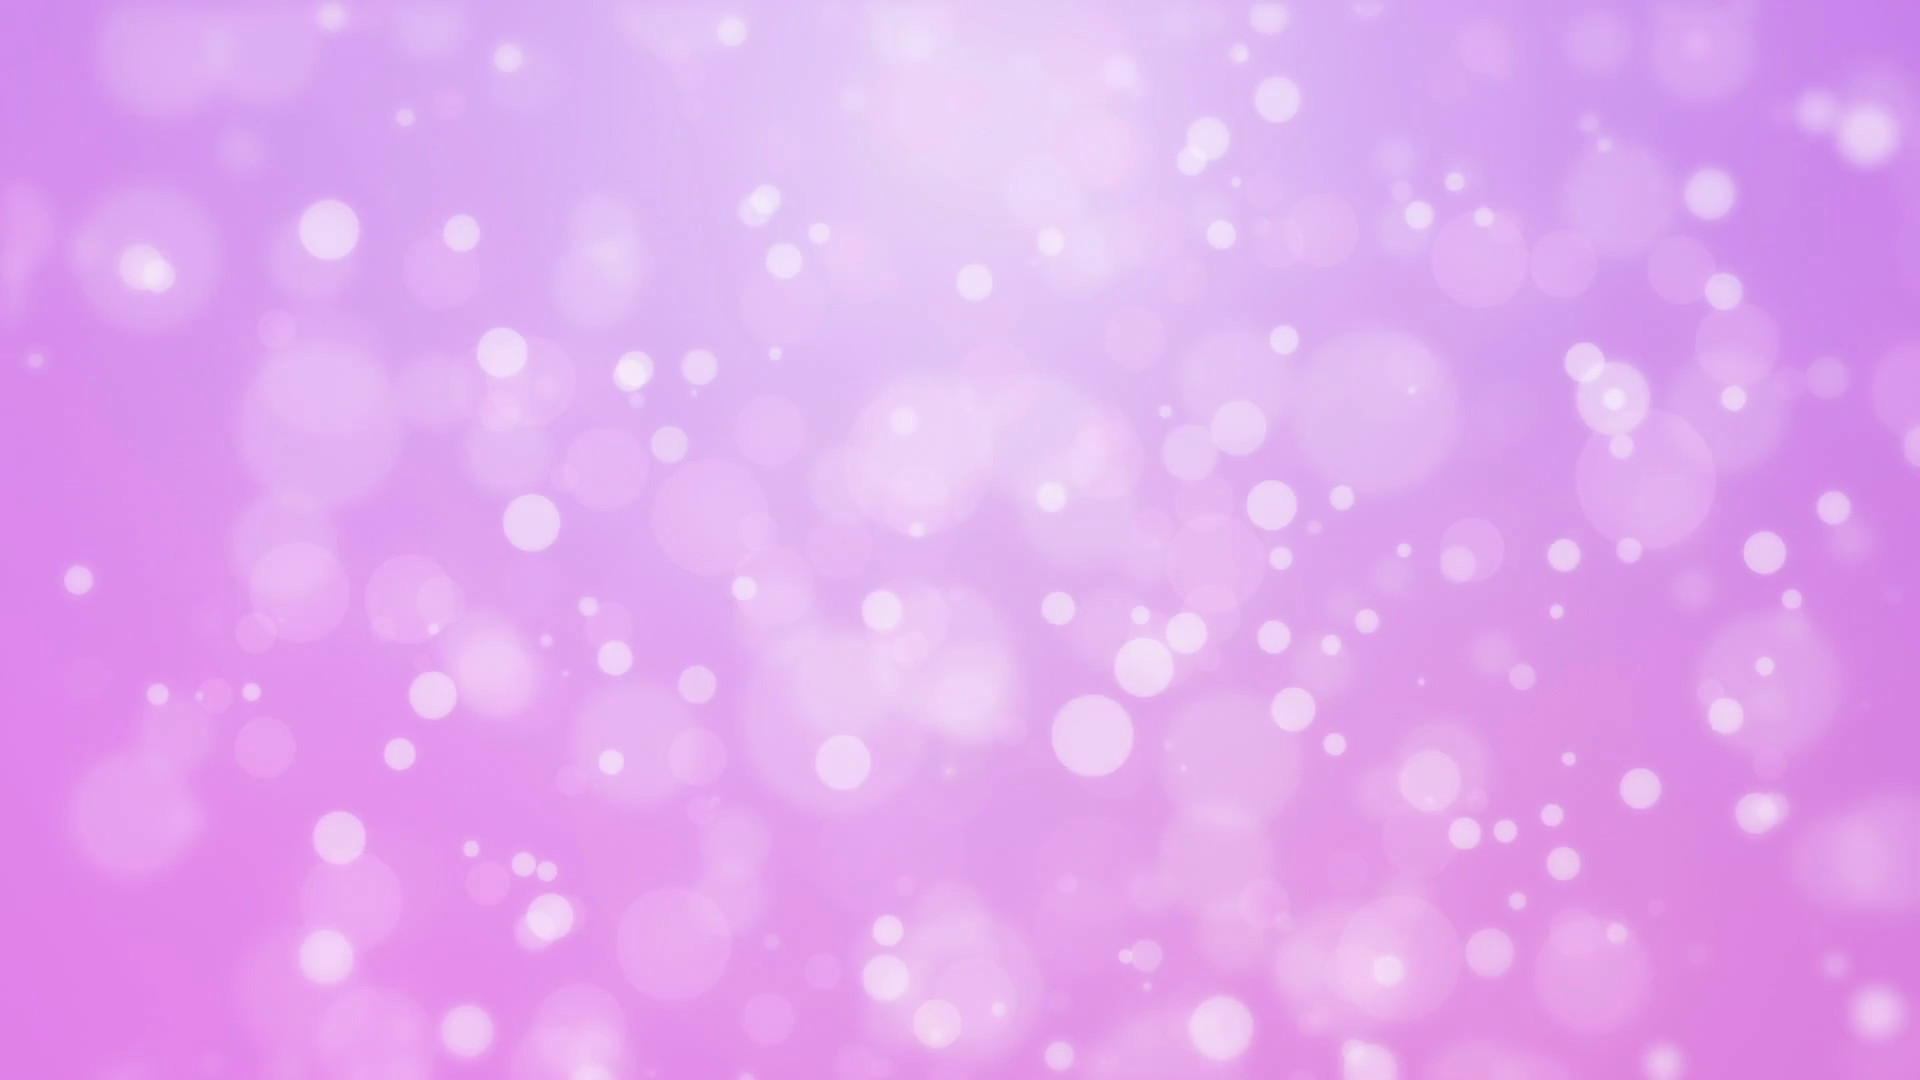 1920x1080 Subscription Library Sweet romantic purple pink gradient animated background  with floating glowing bokeh lights